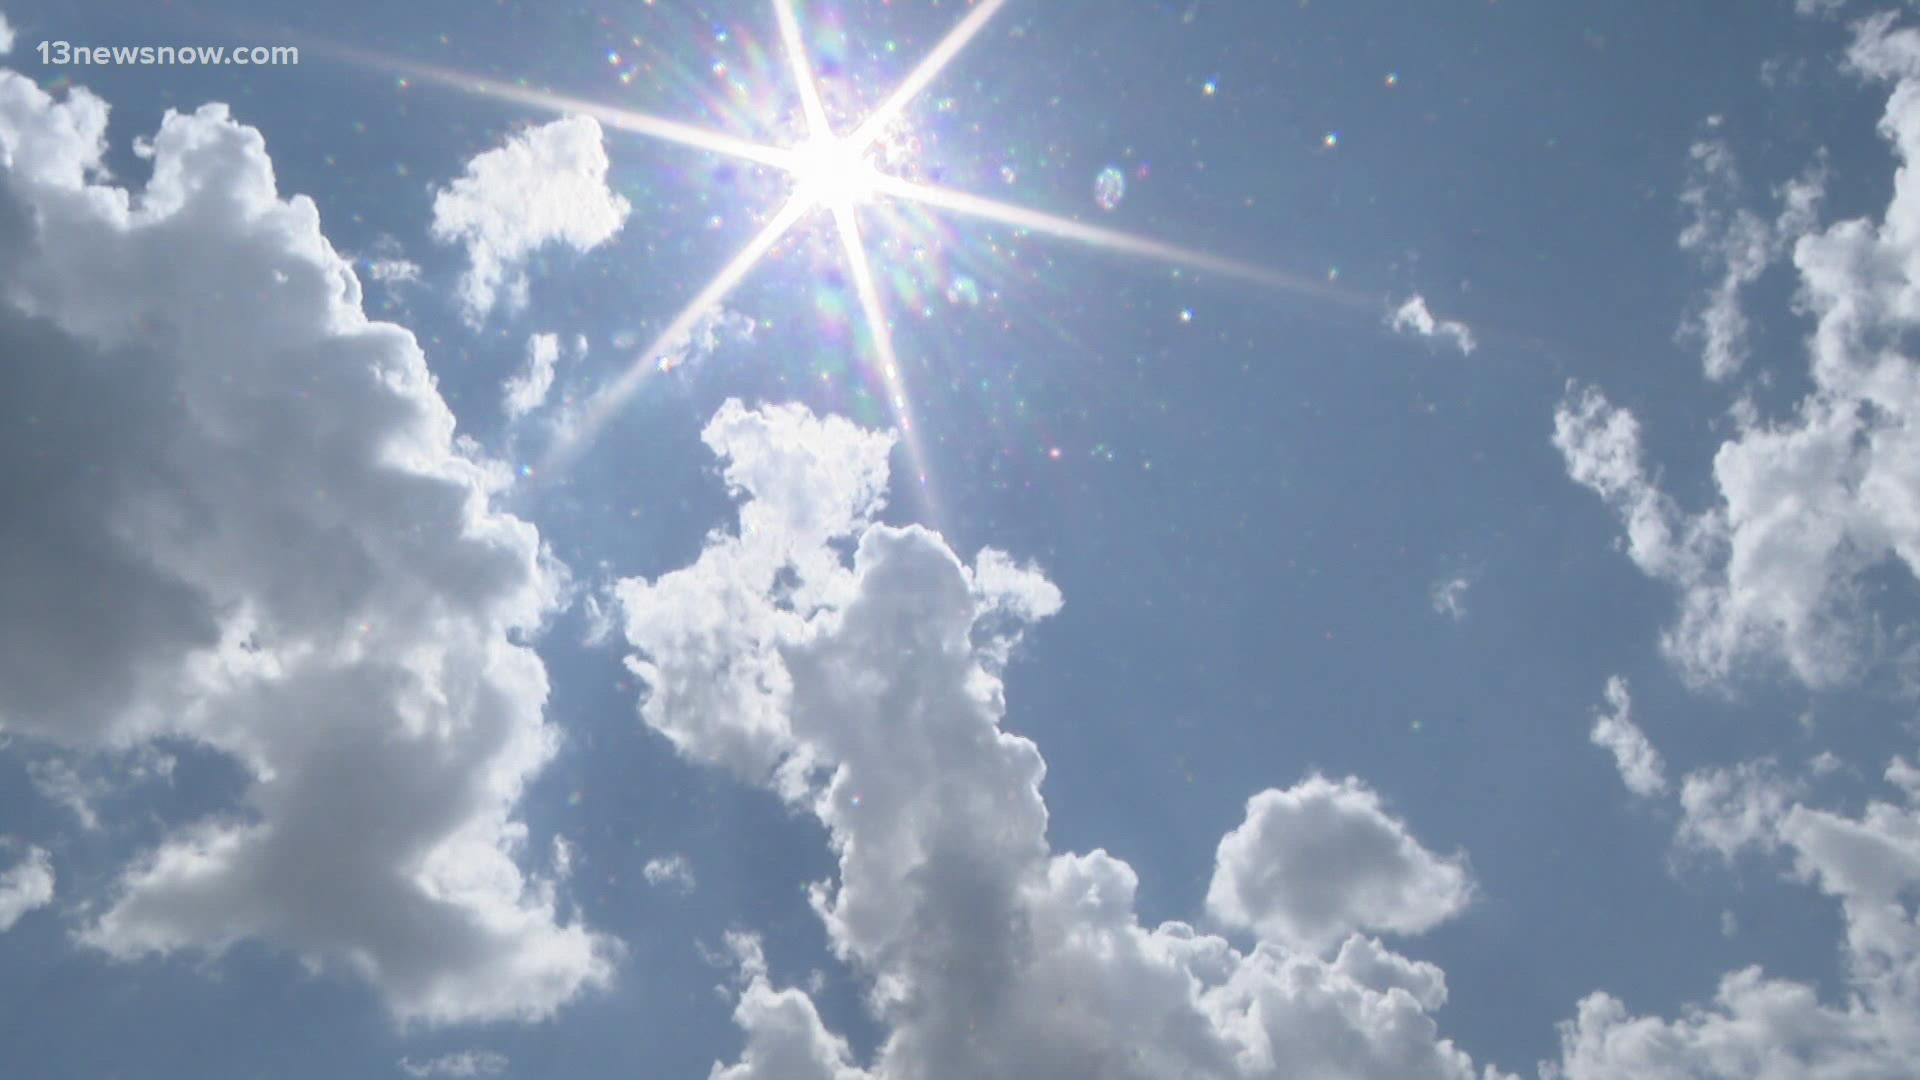 The last excessive heat warning in Hampton Roads was issued two years ago.